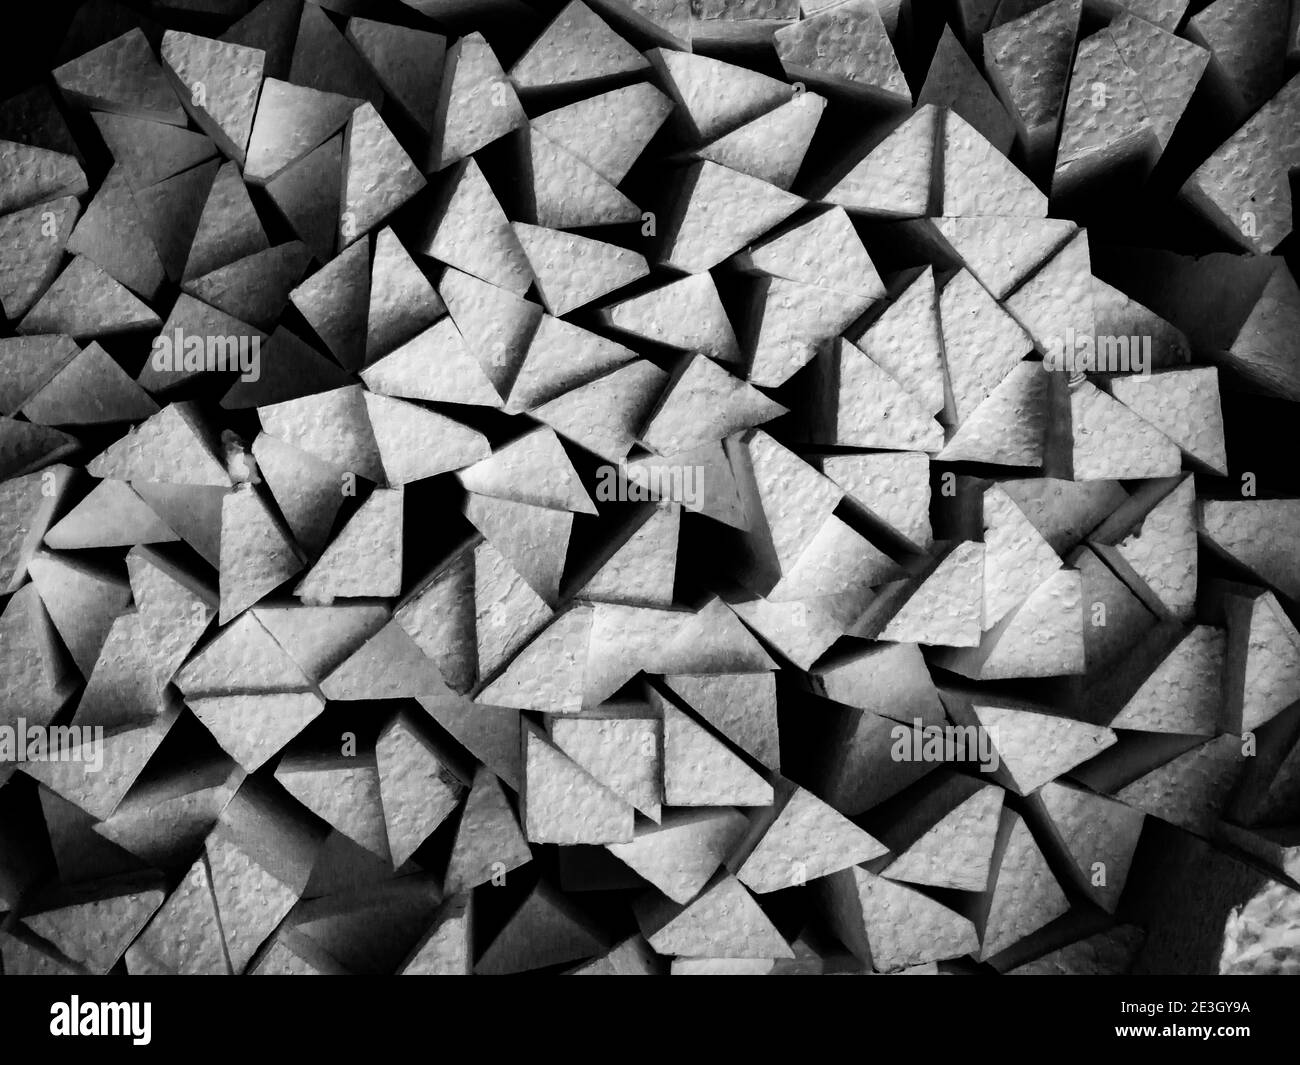 packaging shapes white polystyrene material Stock Photo - Alamy